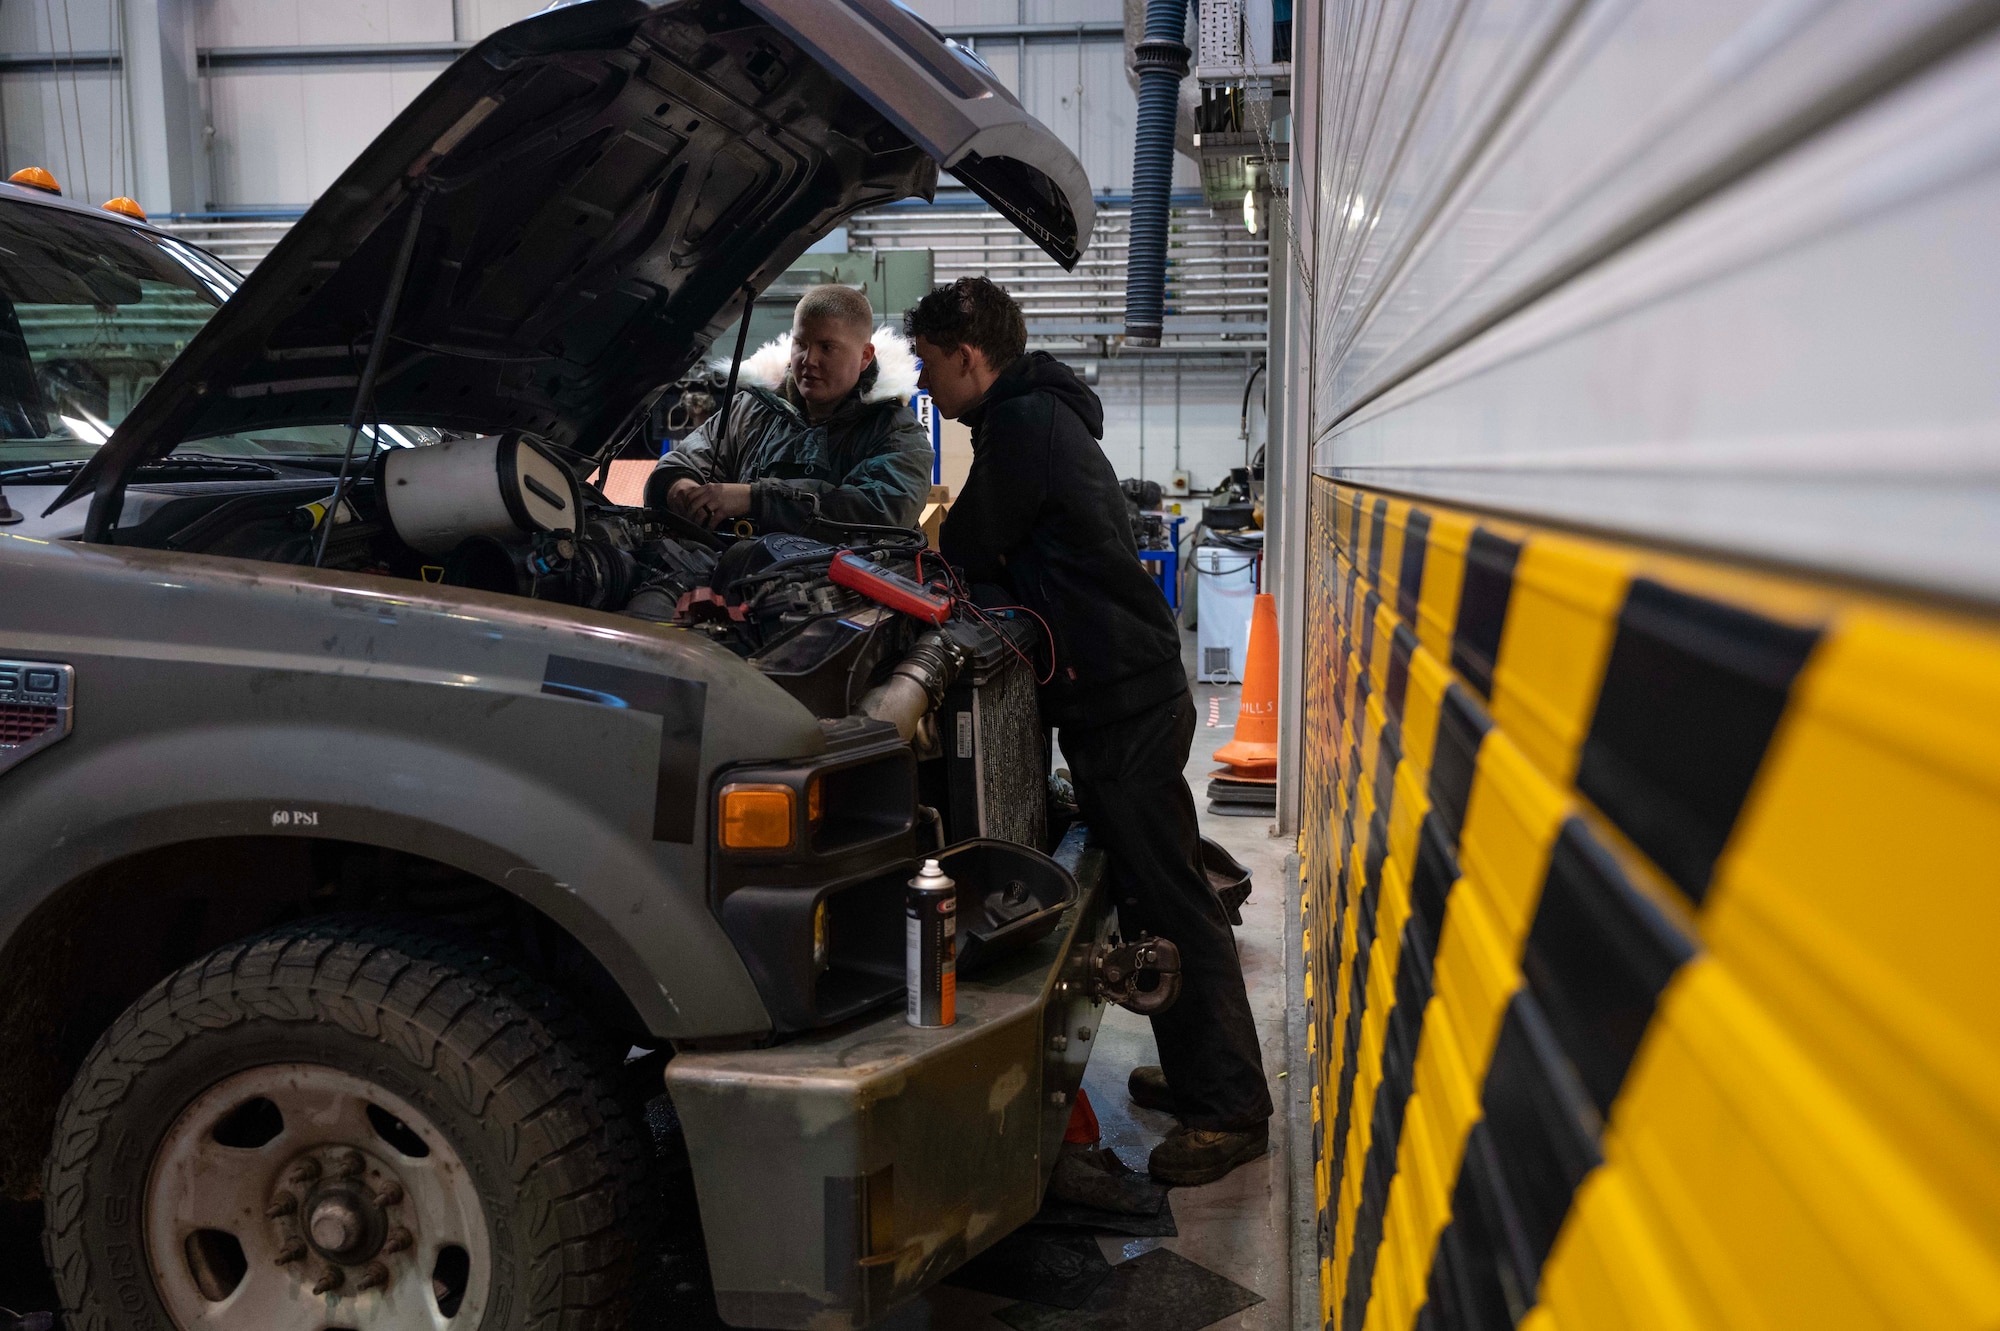 Airmen from the 100th Logistics Readiness Squadron vehicle management section troubleshoot an engine startup on a government vehicle at RAF Mildenhall, England, Jan. 9, 2023. Flightline vehicle maintenance Airmen repair and service a wide range of vehicles, to include: global aircraft deicer trucks, Caterpillar 50K forklifts, Tunner 60K aircraft cargo loader/transporters and Grove pushback tow tractor MB-2. (U.S. Air Force photo by Airman 1st Class Viviam Chiu)